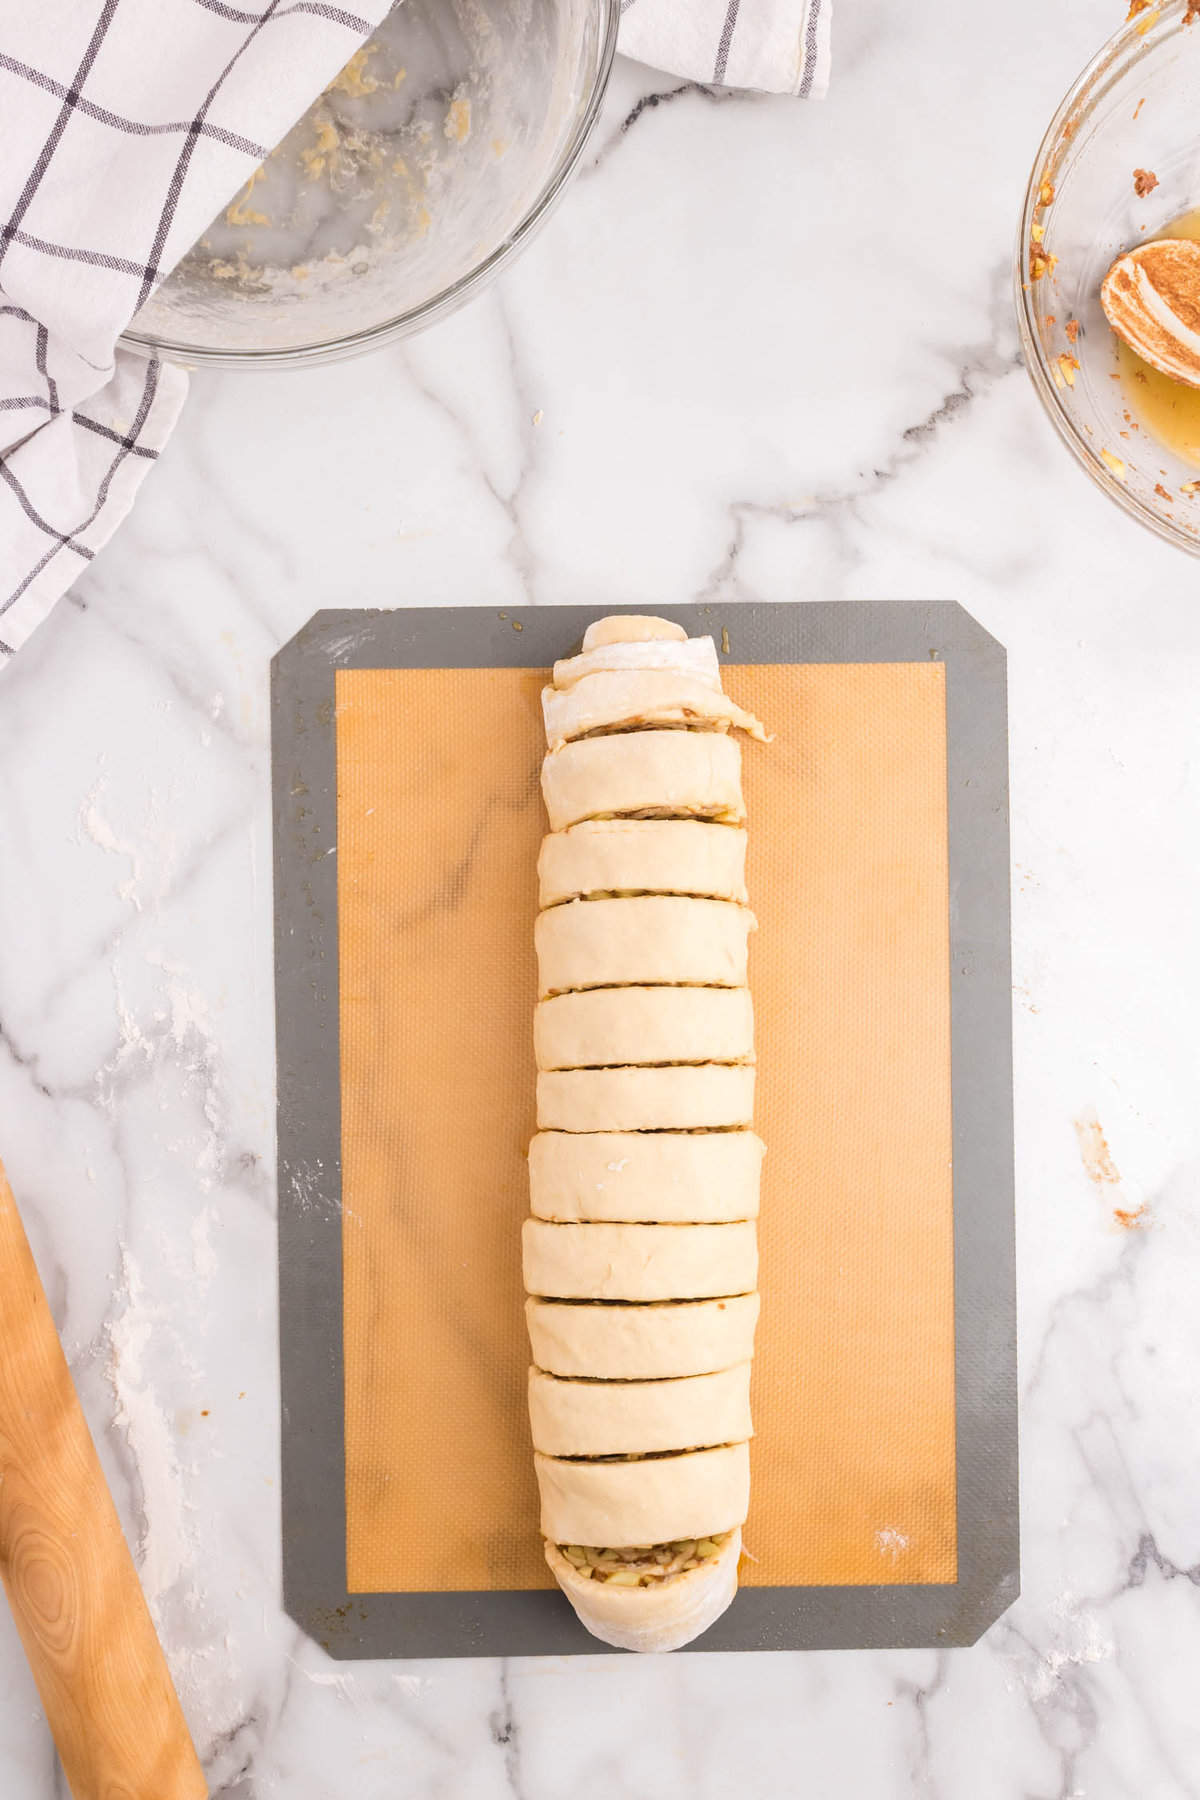 Slicing rolled dough and apple mixture for Apple Cinnamon Rolls